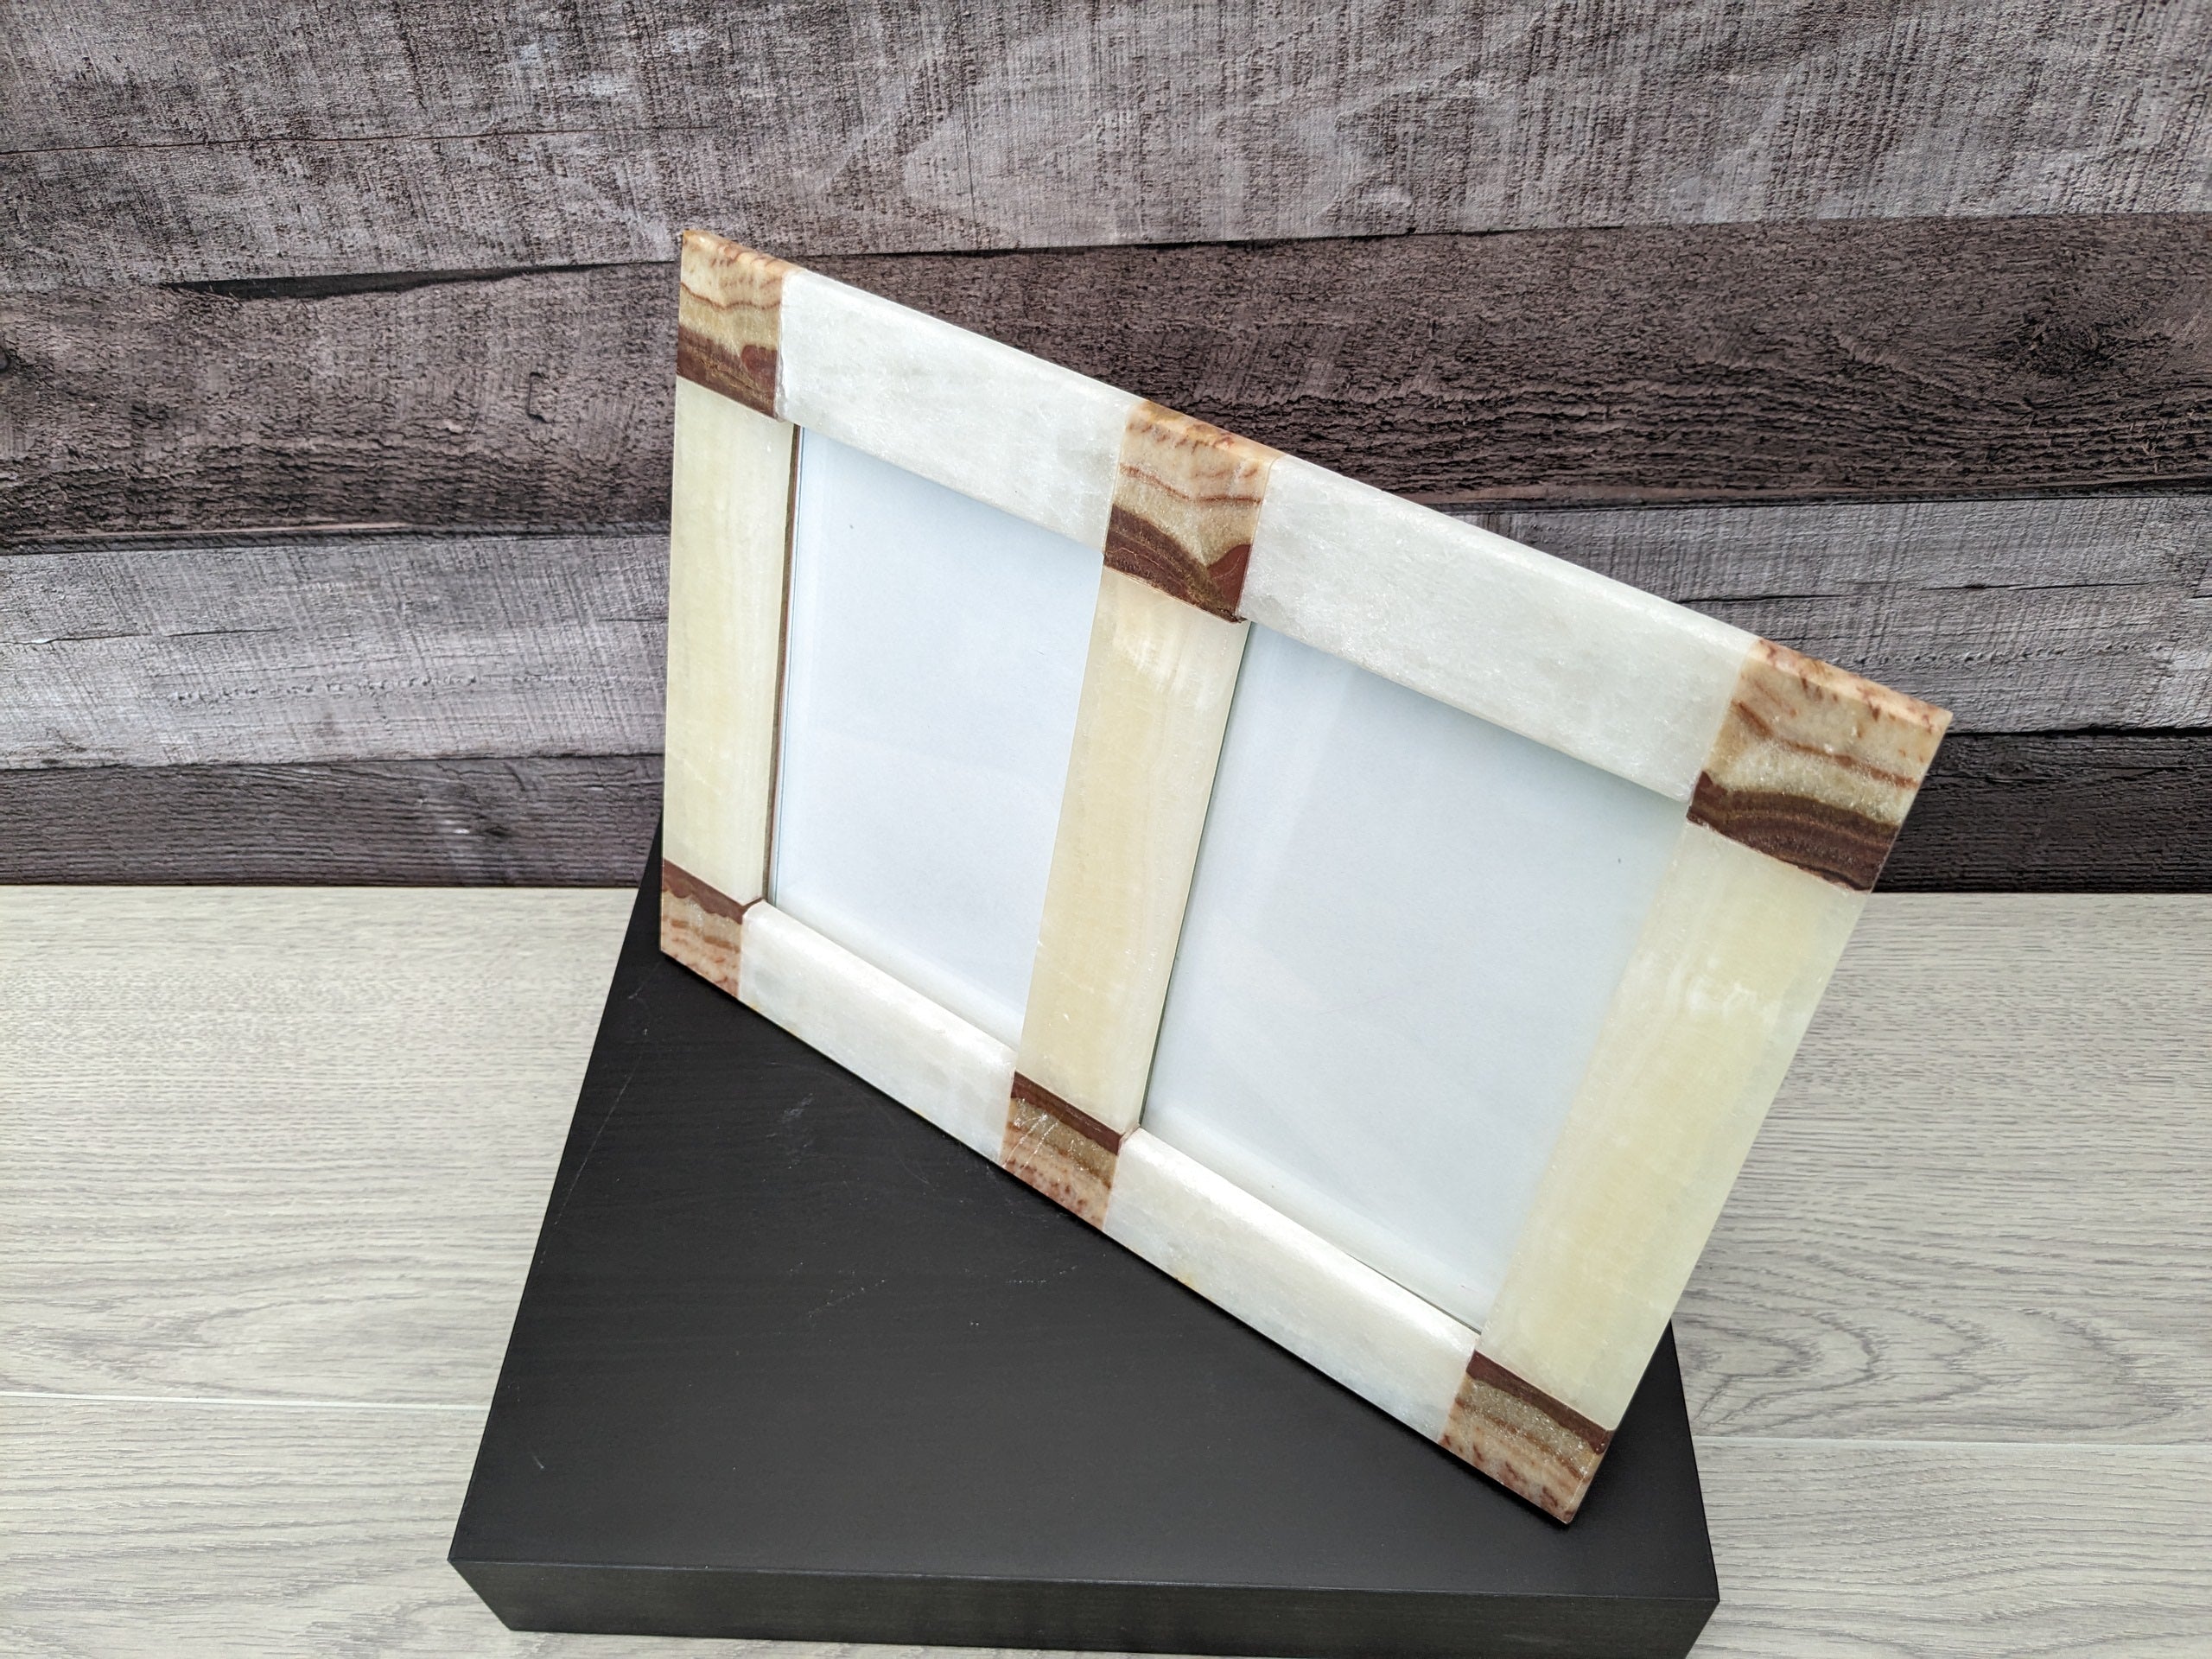 Beige and Brown Onyx and Travertine Stone Double Frame. Handmade in Mexico. We package and ship from the USA. Buy now at www.felipeandgrace.com.